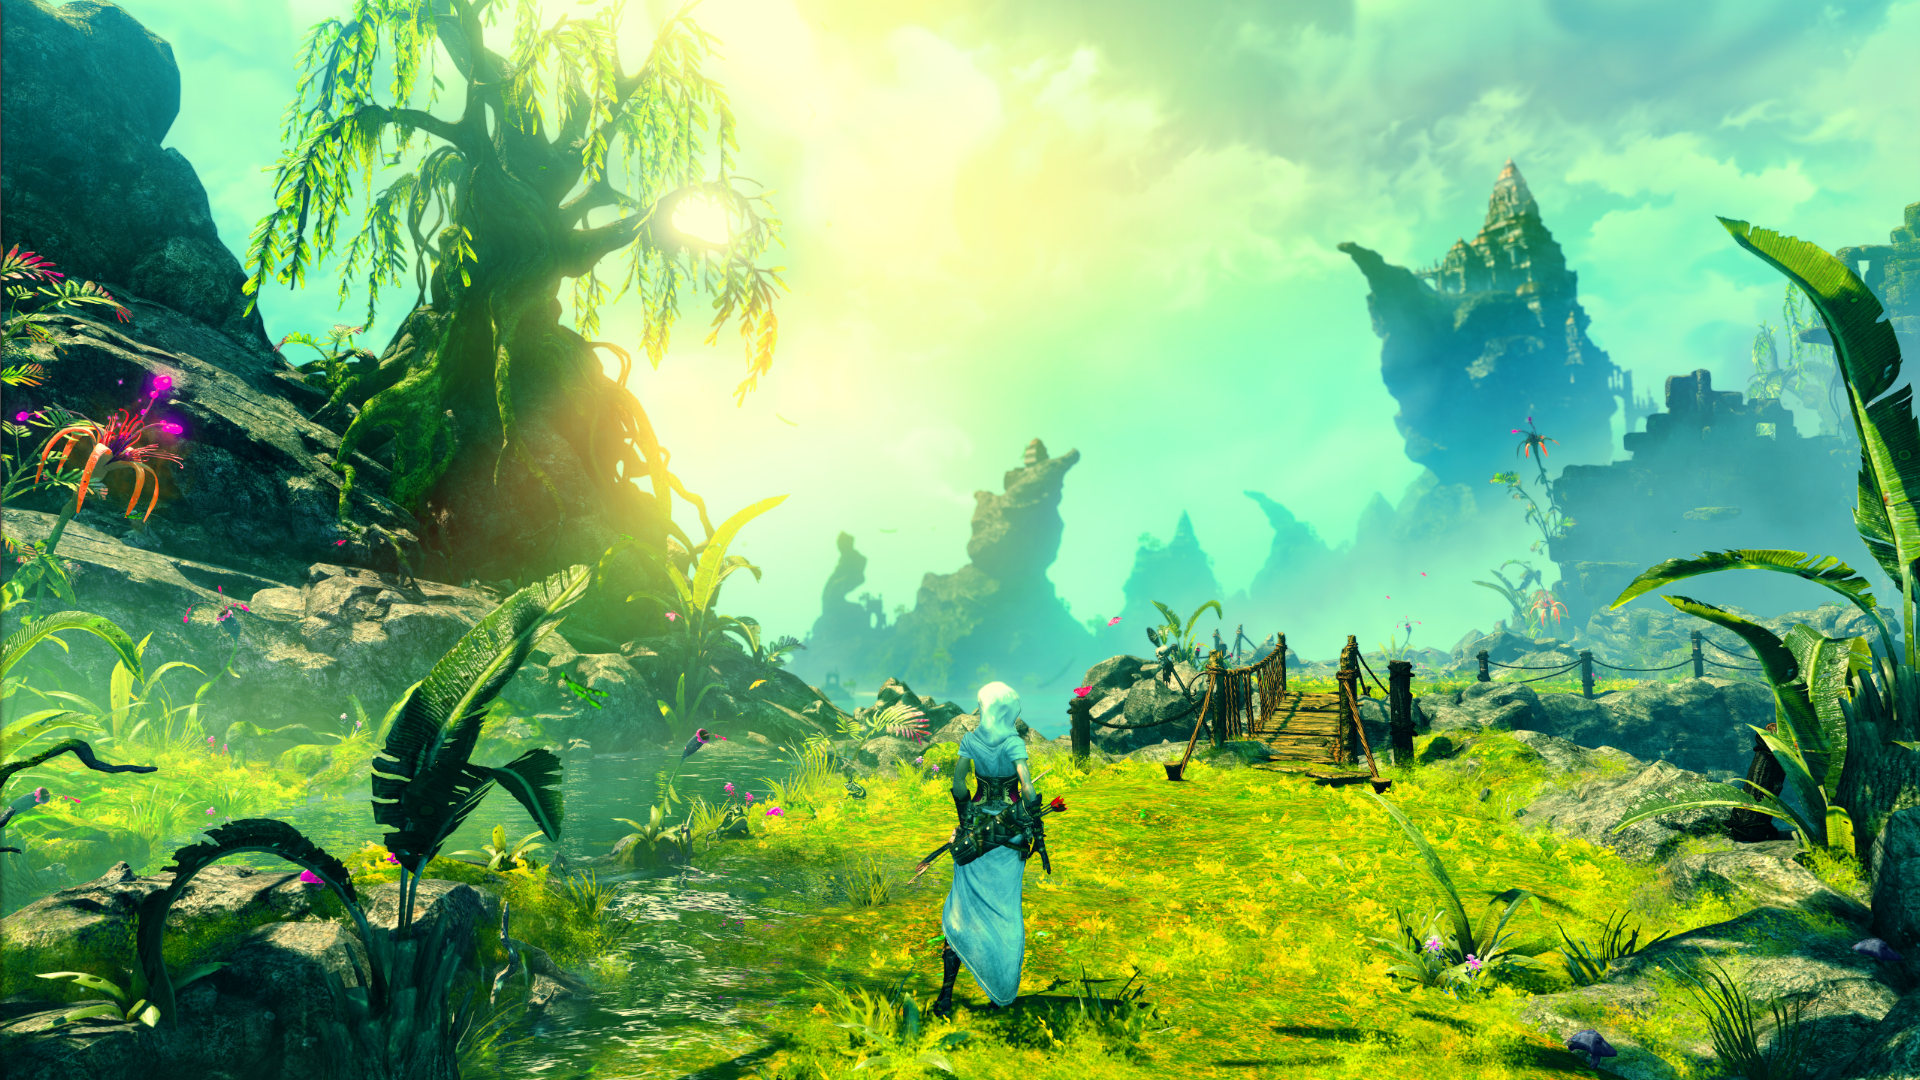 Our First Look At The Next Trine